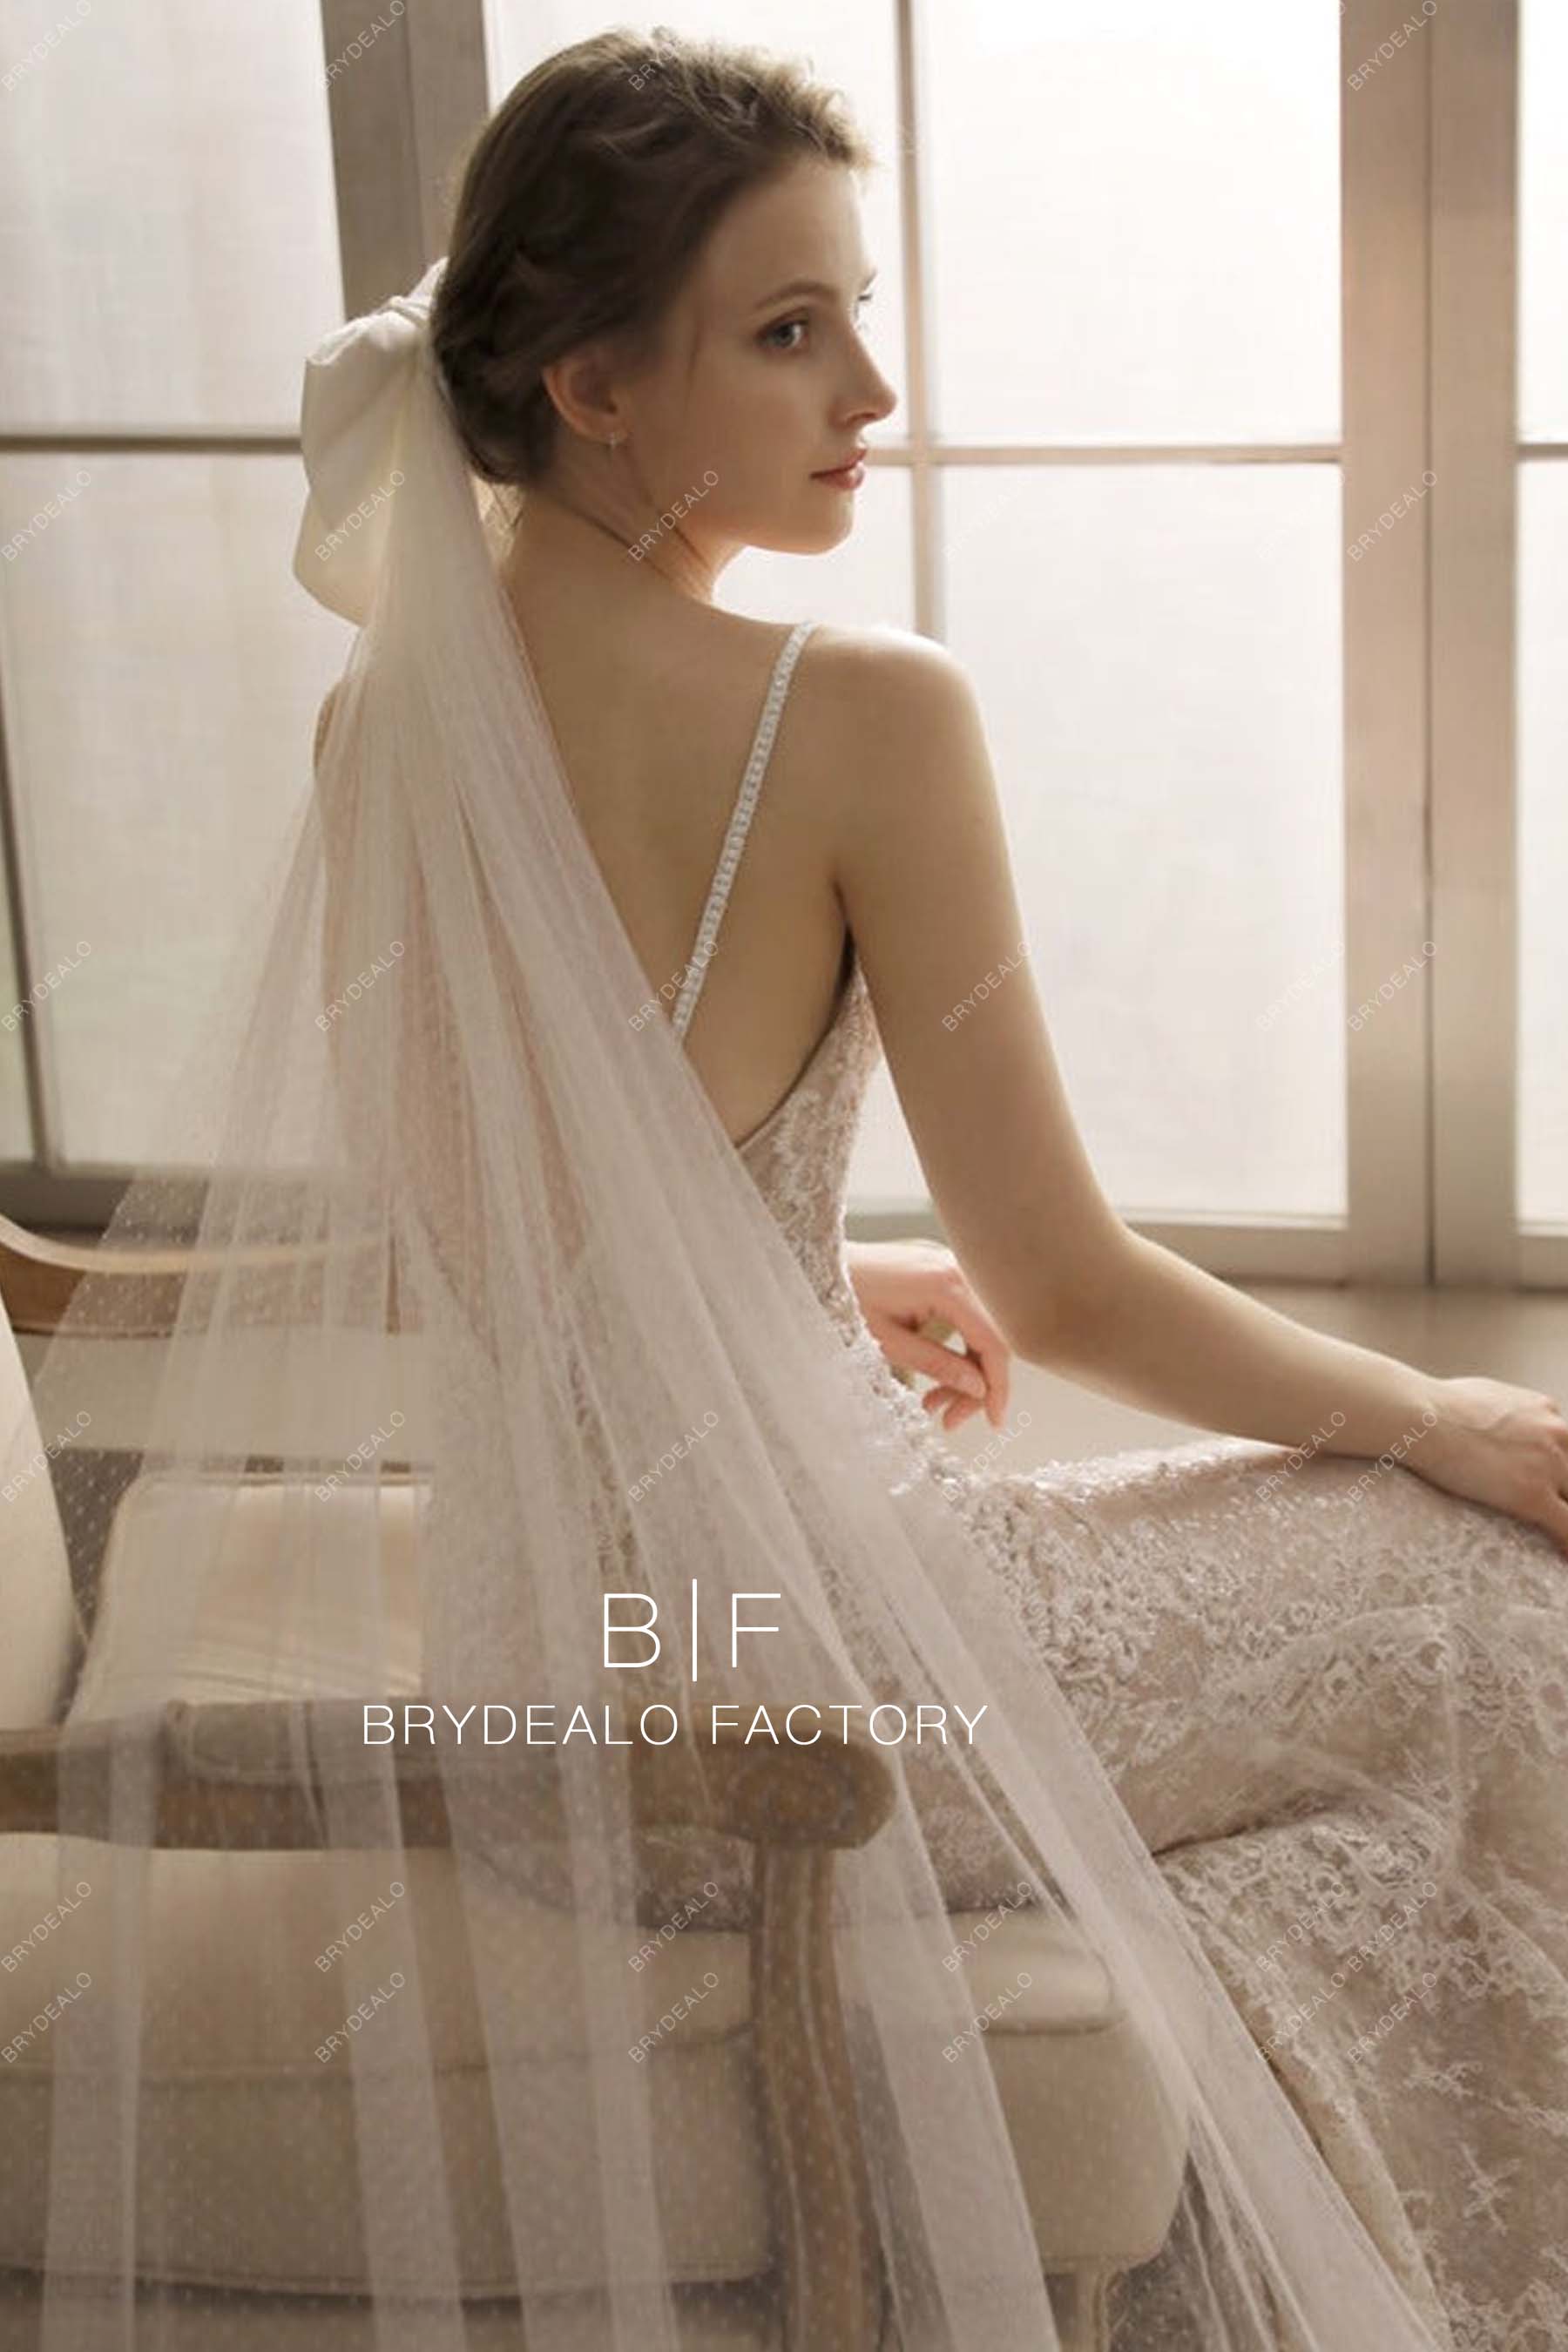 Single Tier Dotted Tulle Bridal Veil